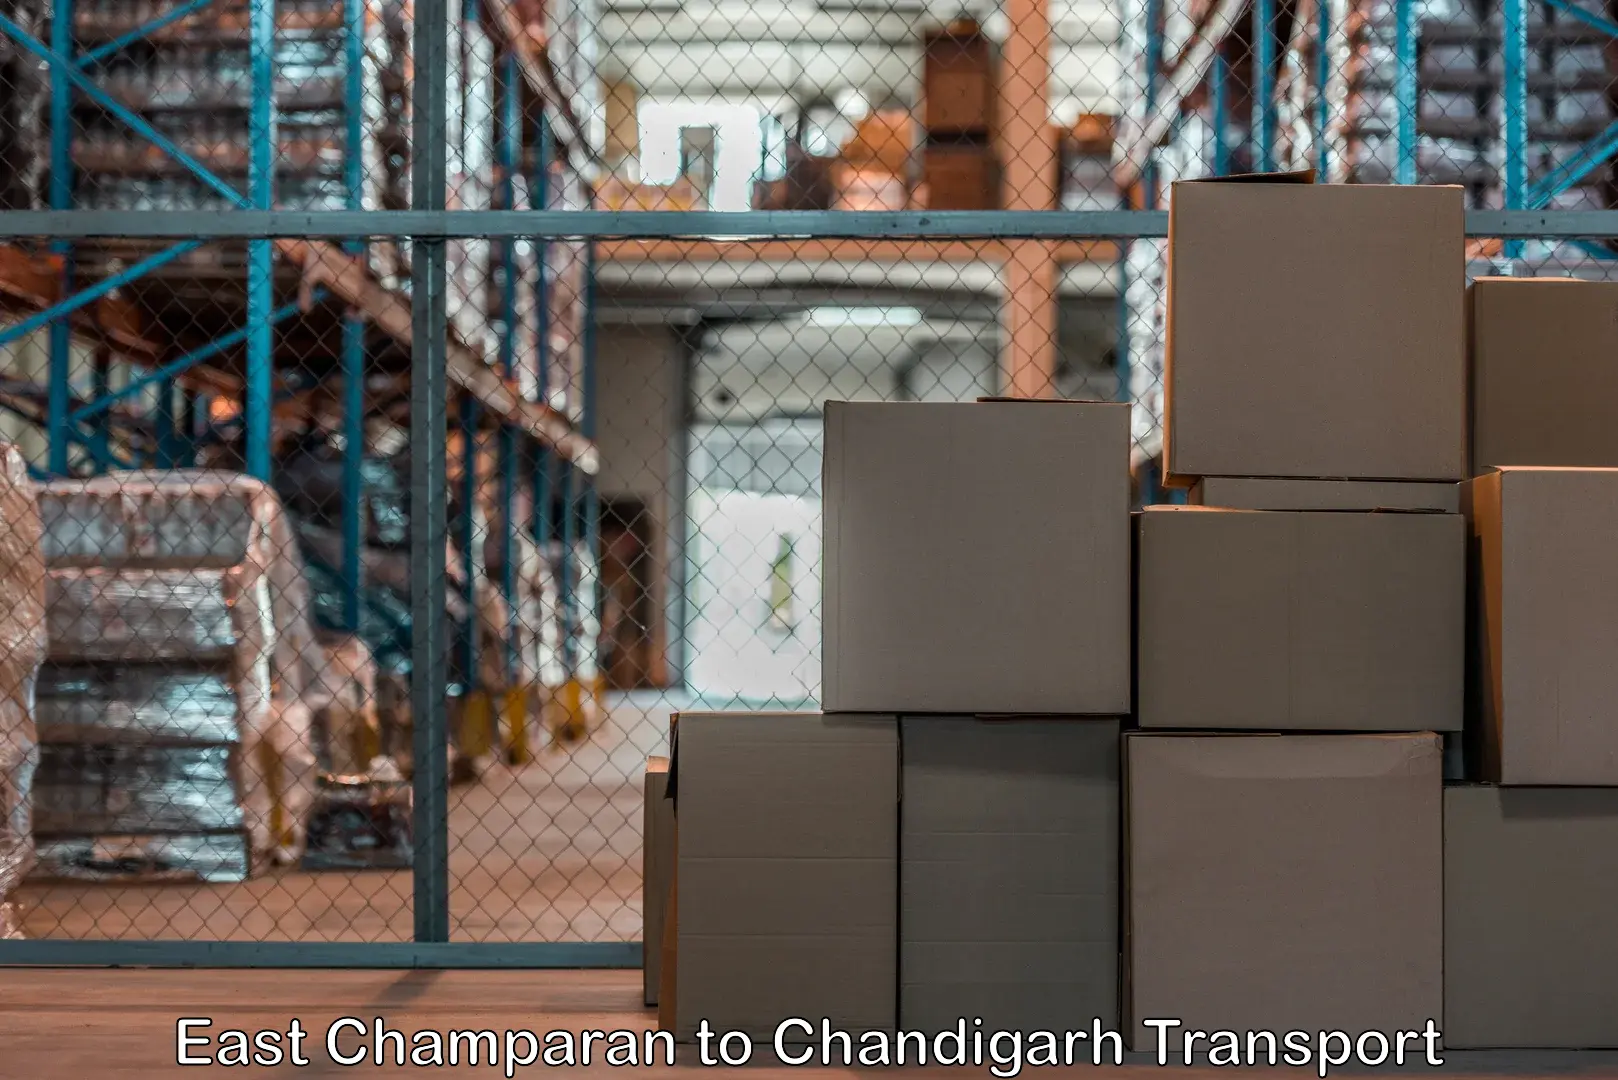 Two wheeler parcel service East Champaran to Chandigarh